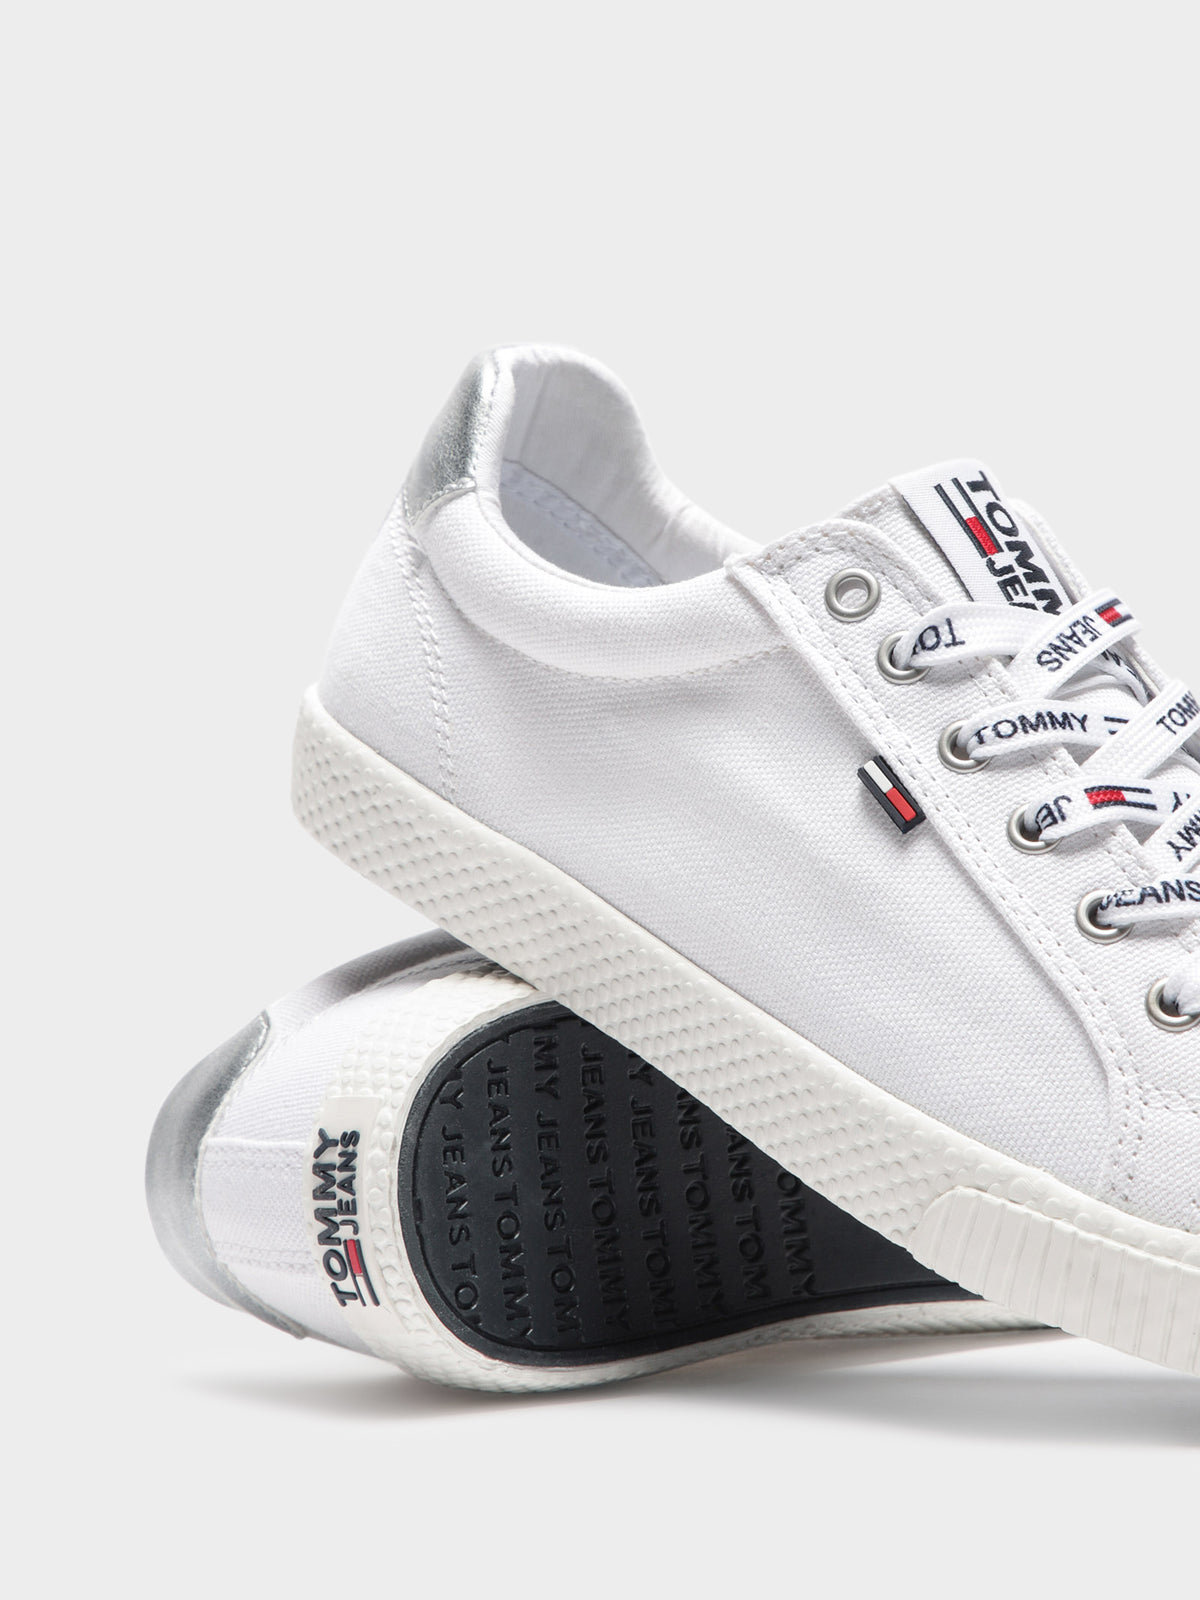 Womens Tommy Jeans Casual Sneaker in White